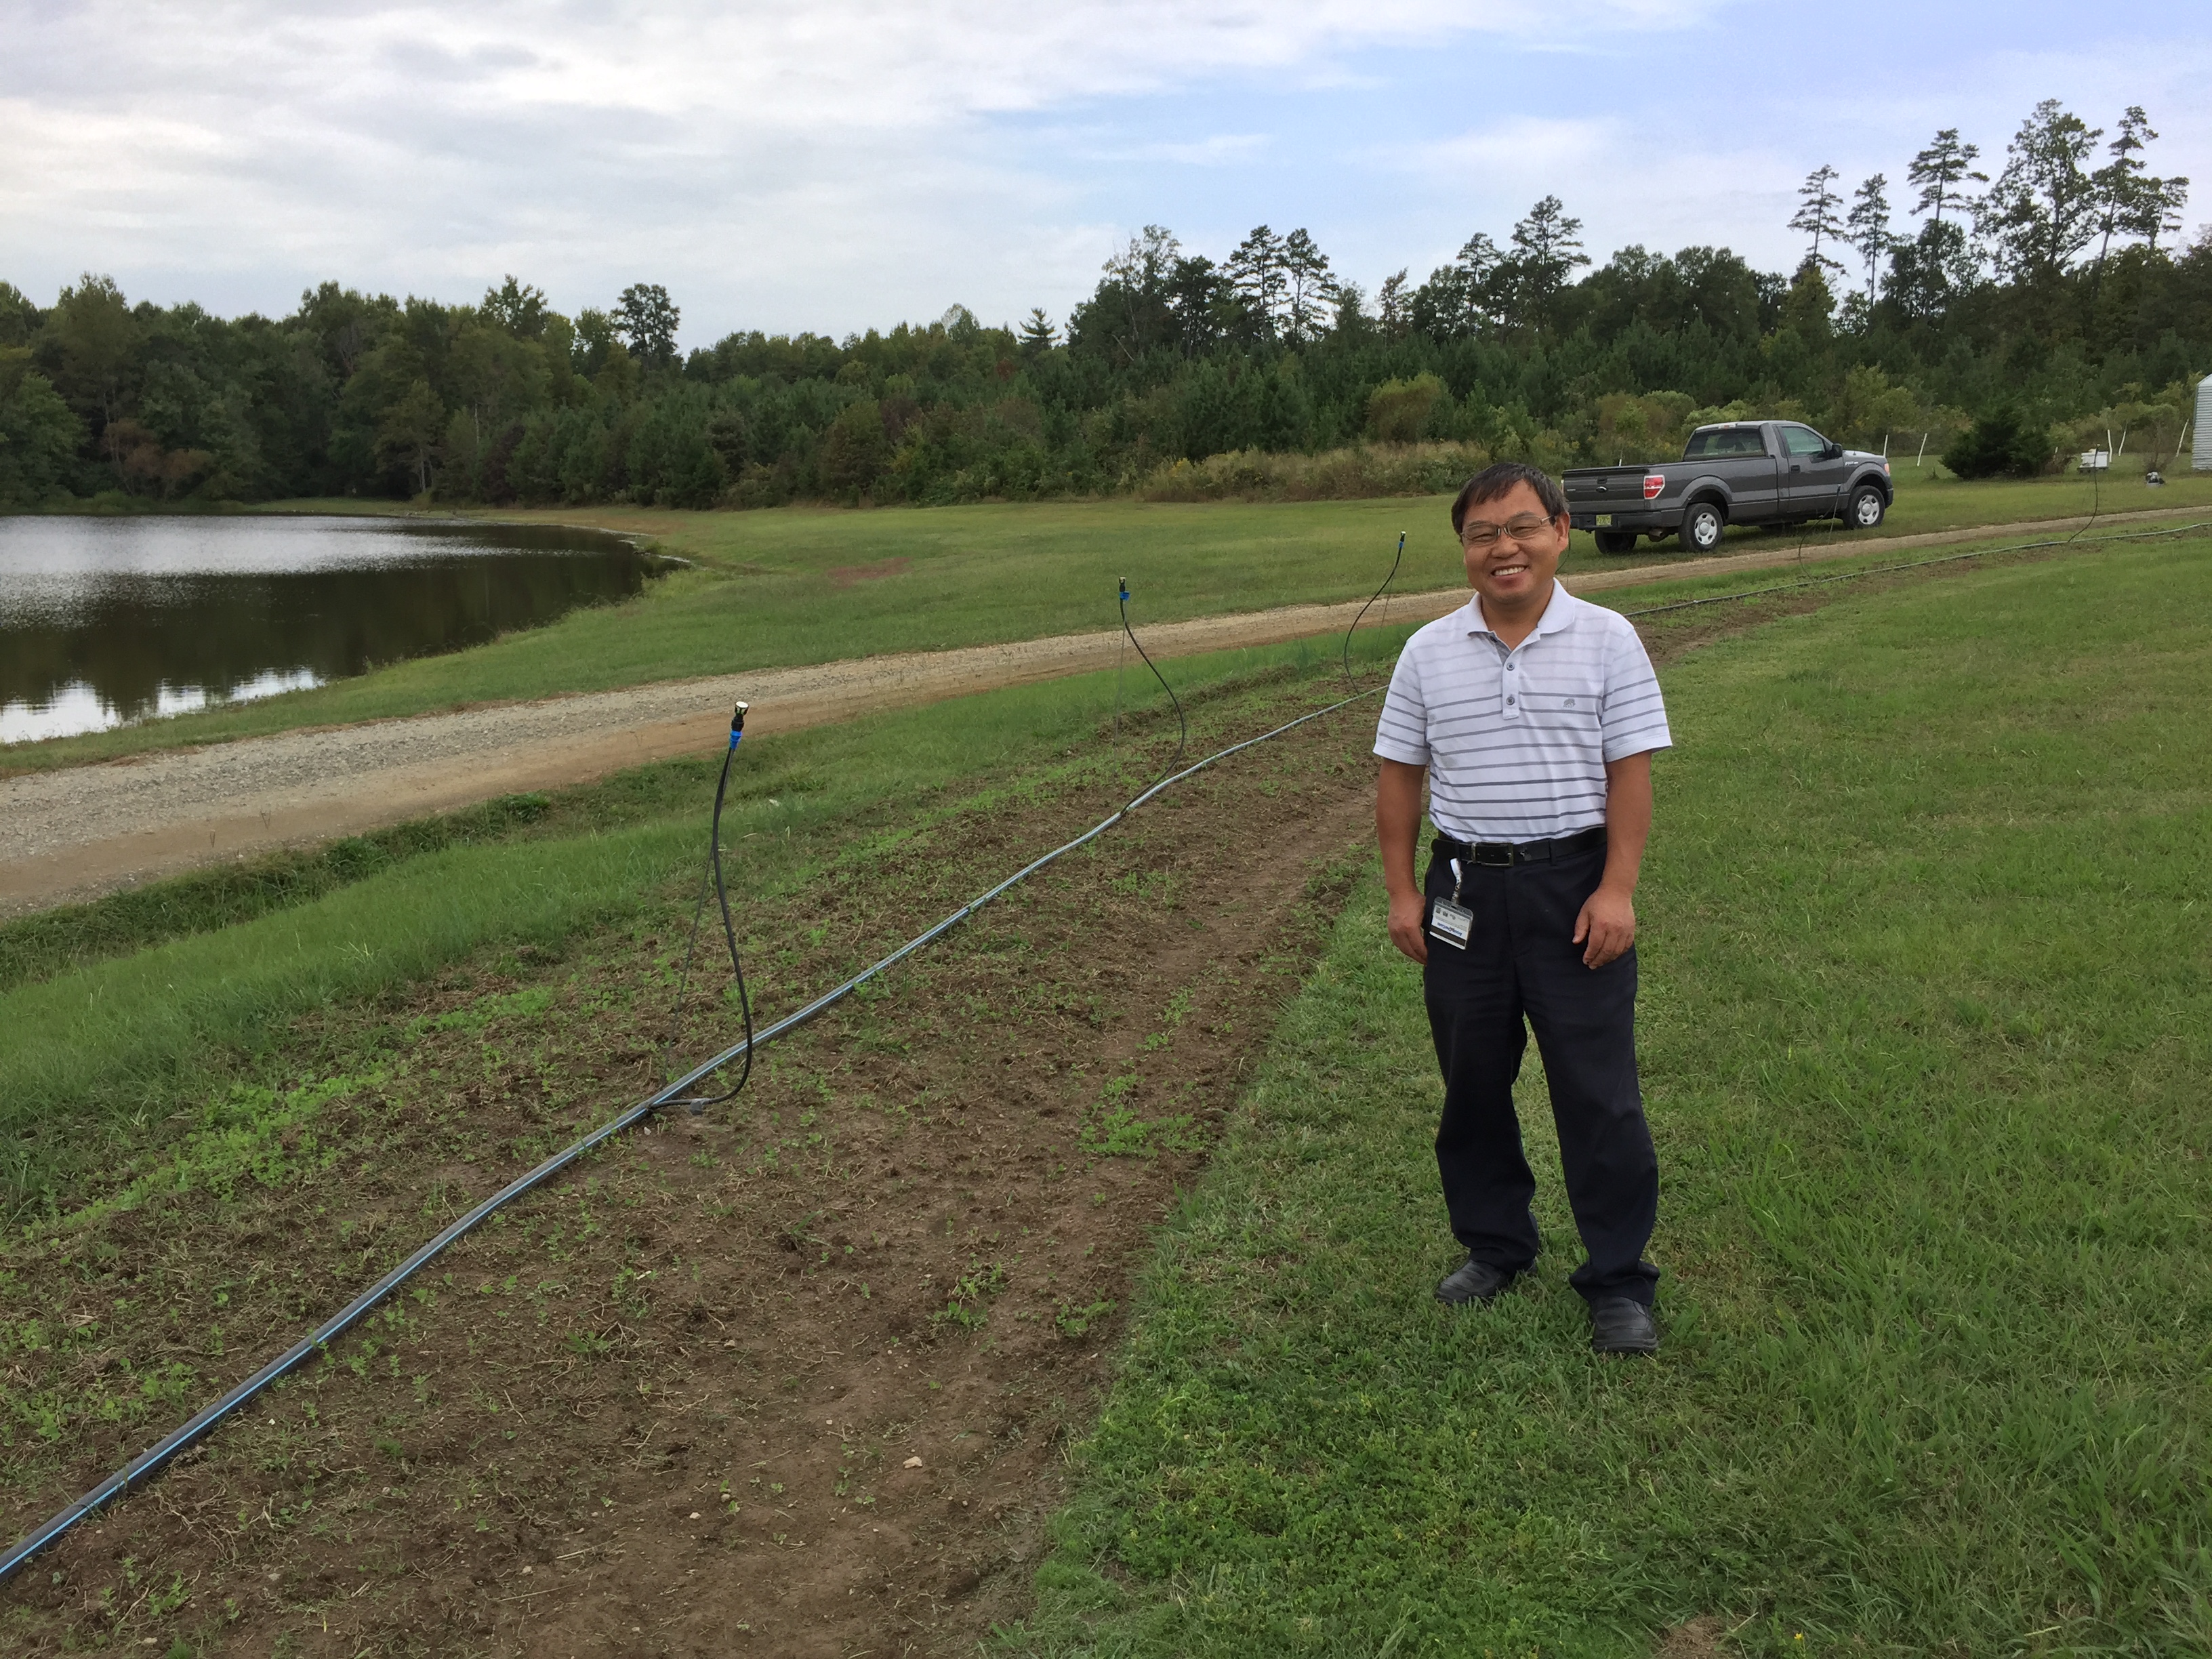 A smiling man stands near the hedgerow-to-be, currently a bed of soil with small plants and some irrigation set up.